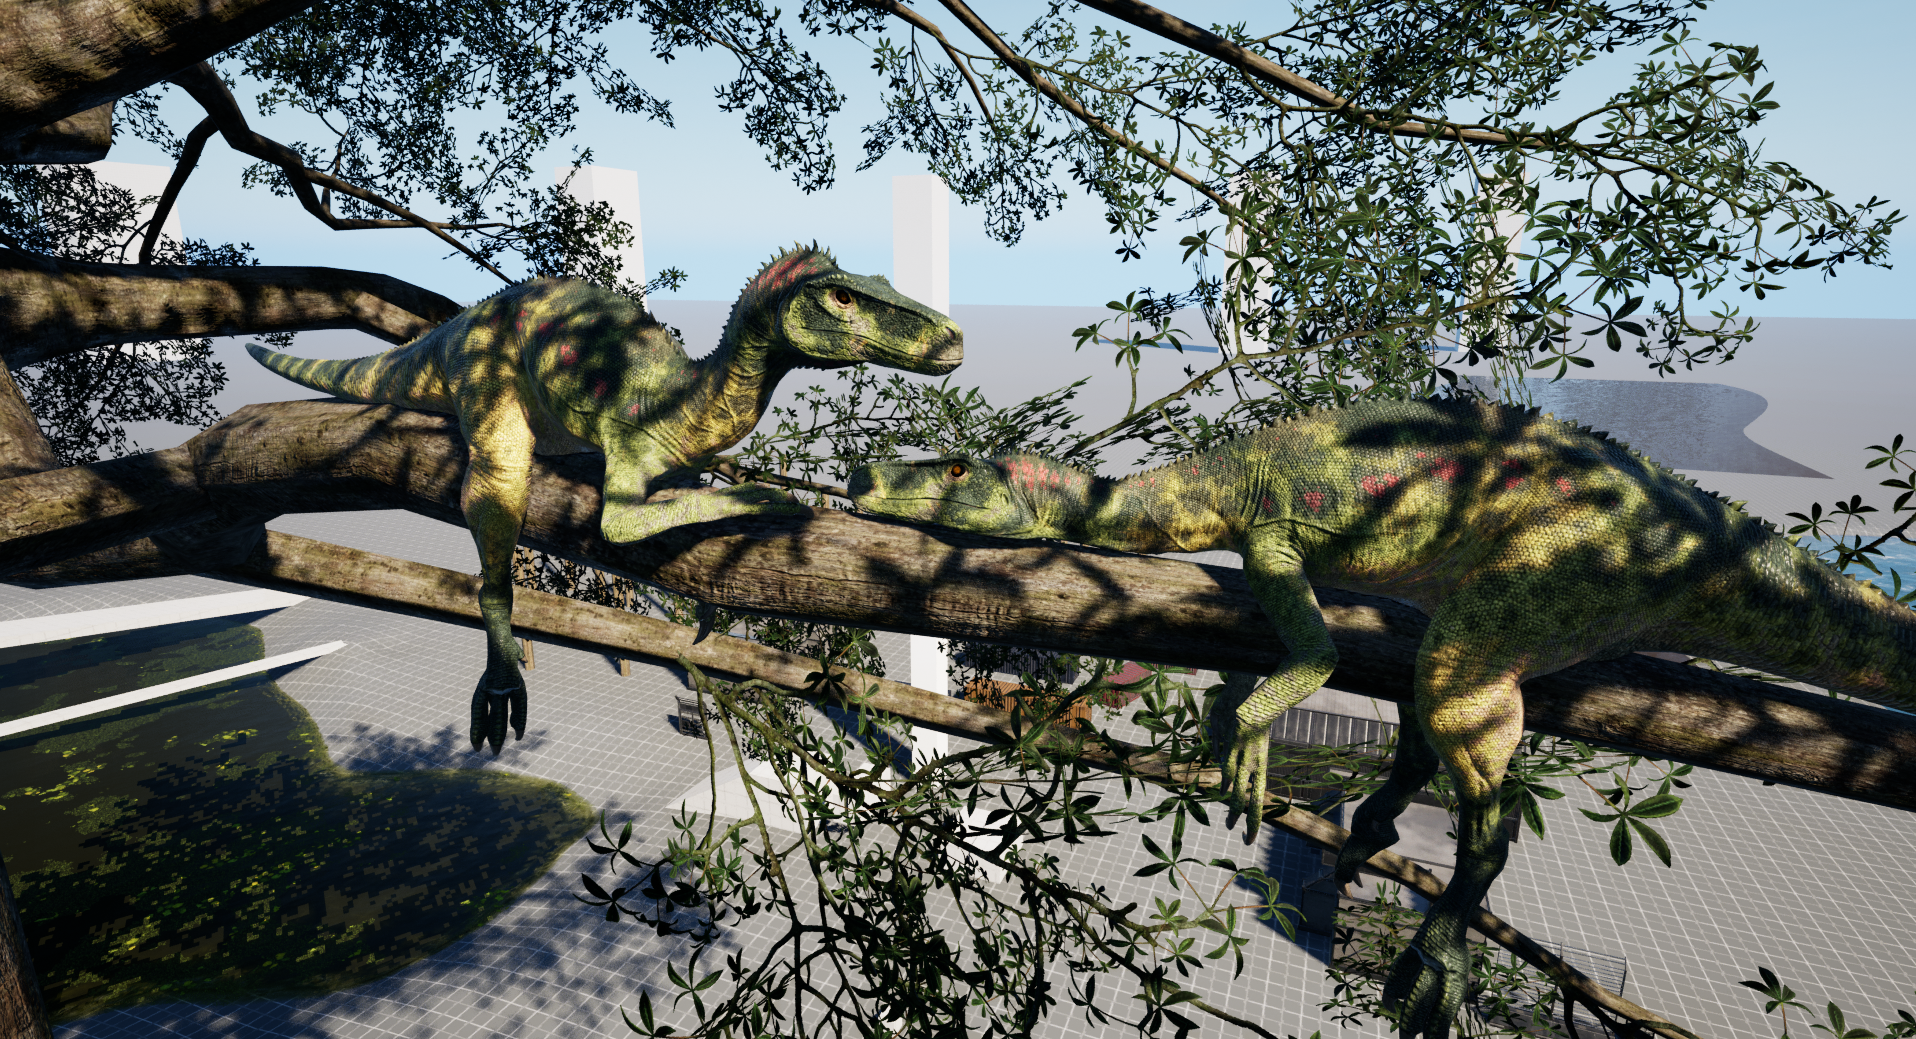 Deinosuchus and Pteranodon Coming Soon! :: The Isle General